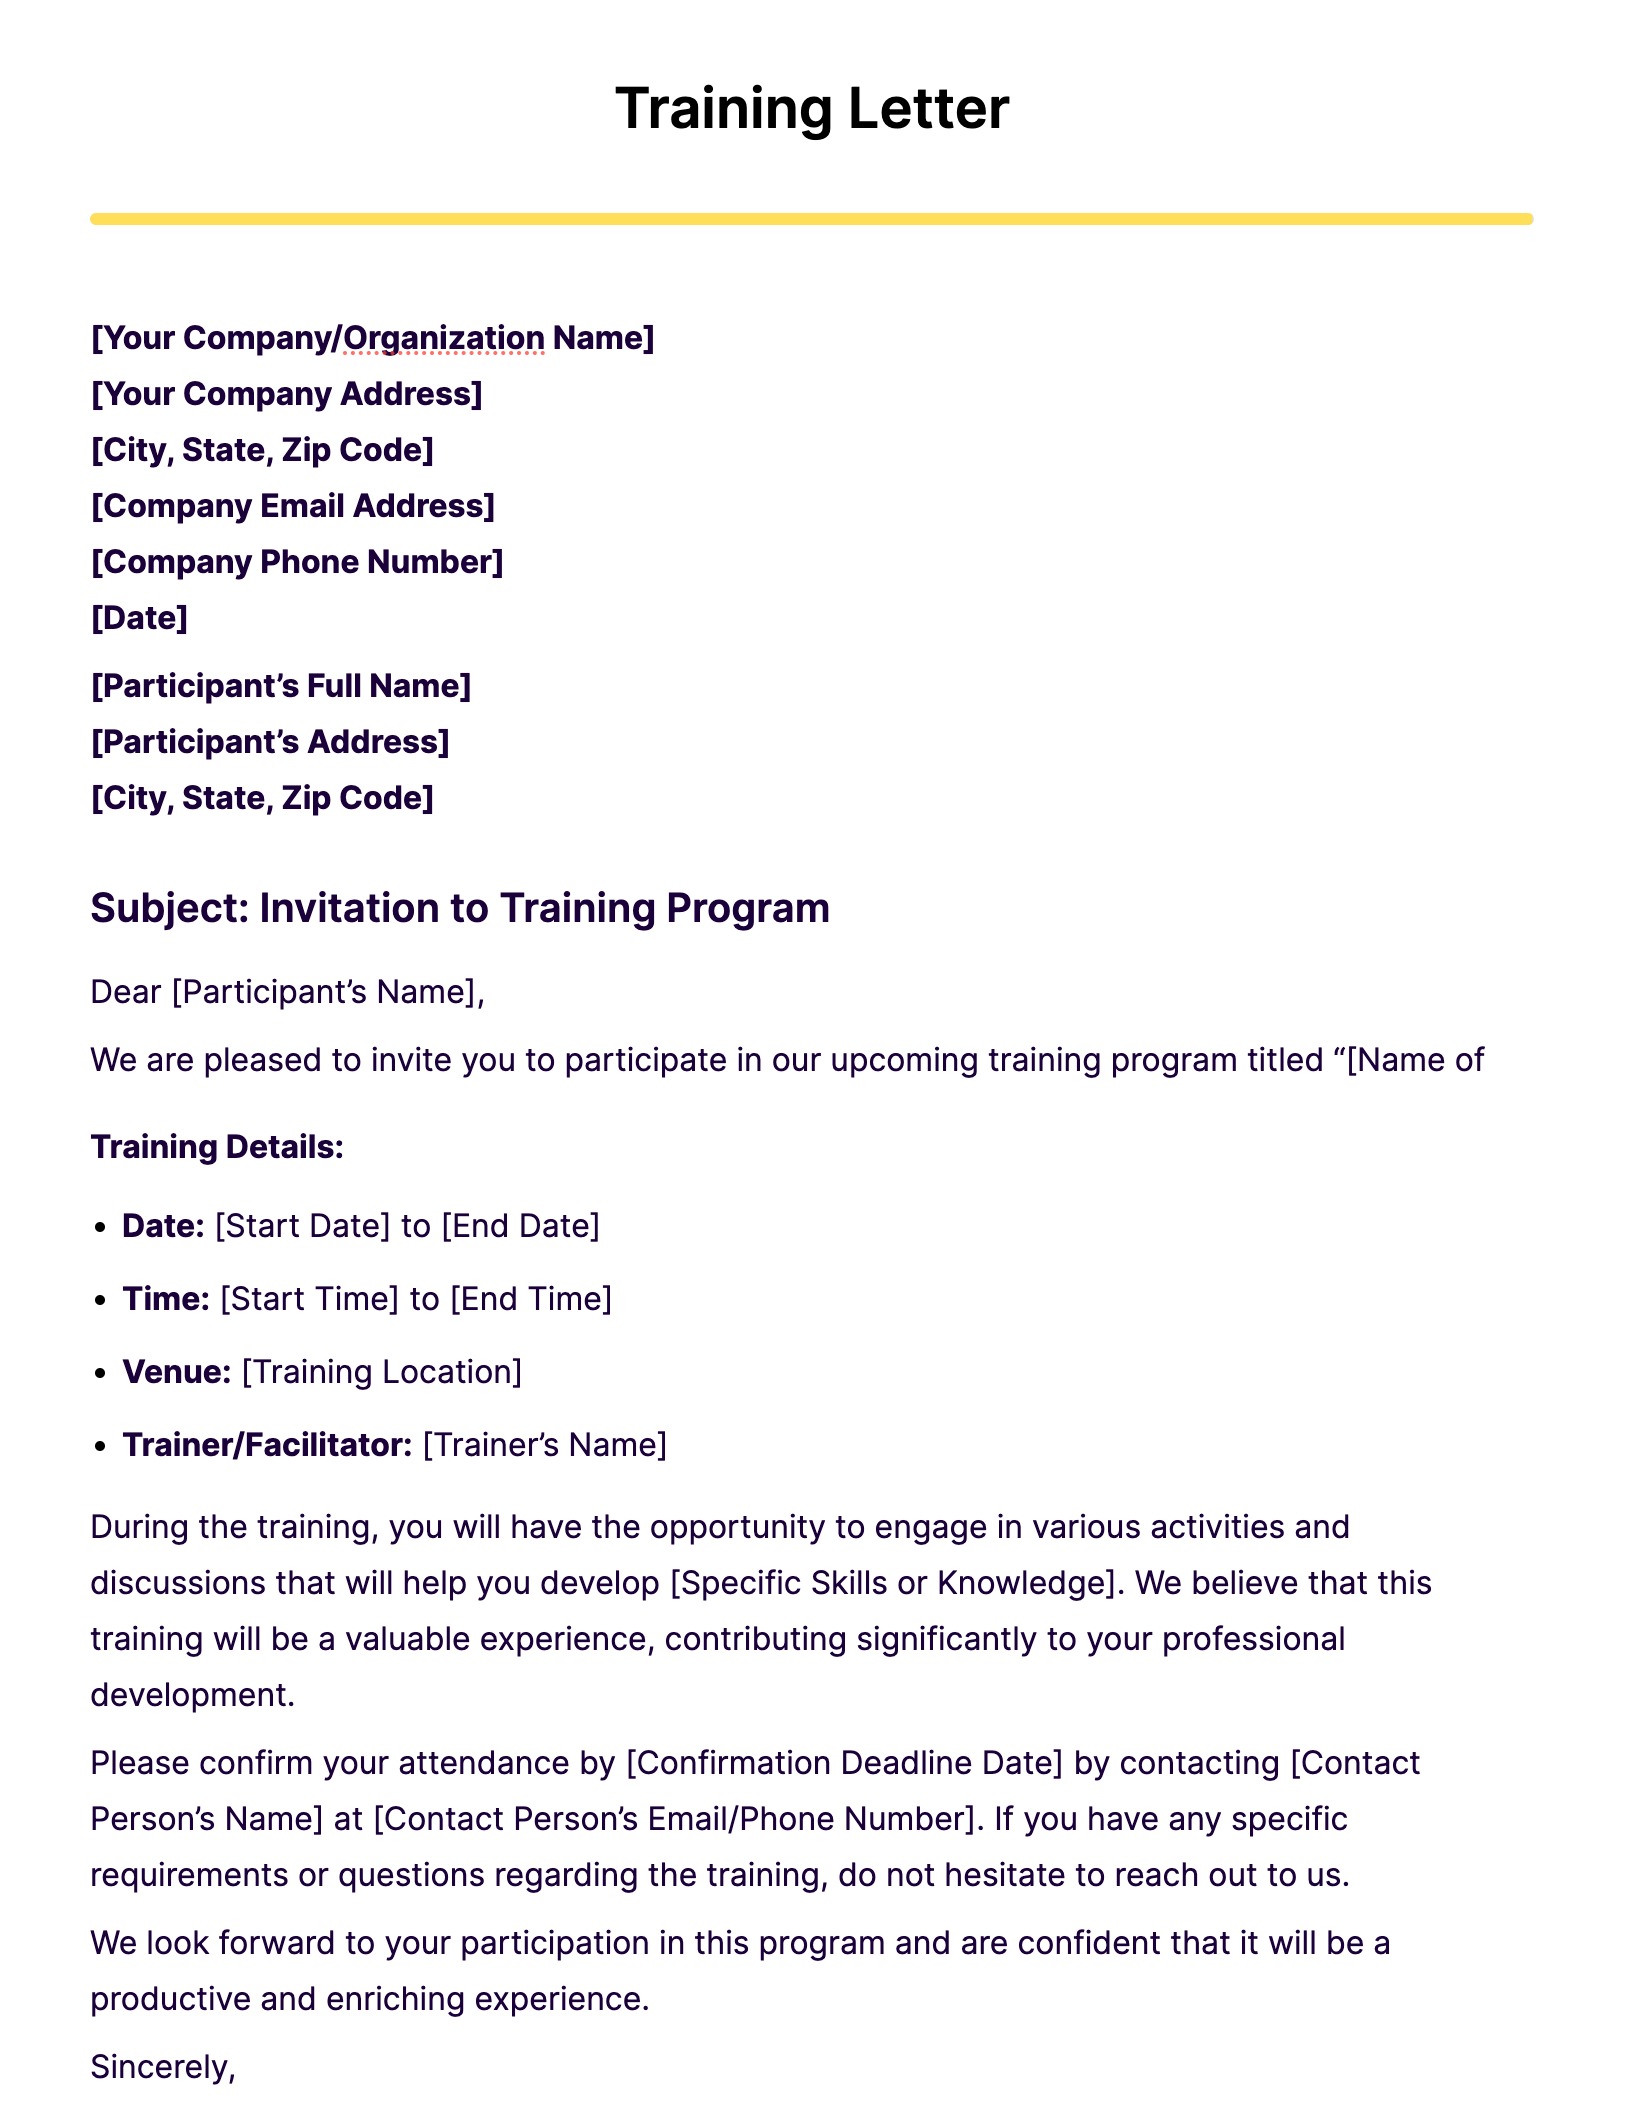 Training Letter Example